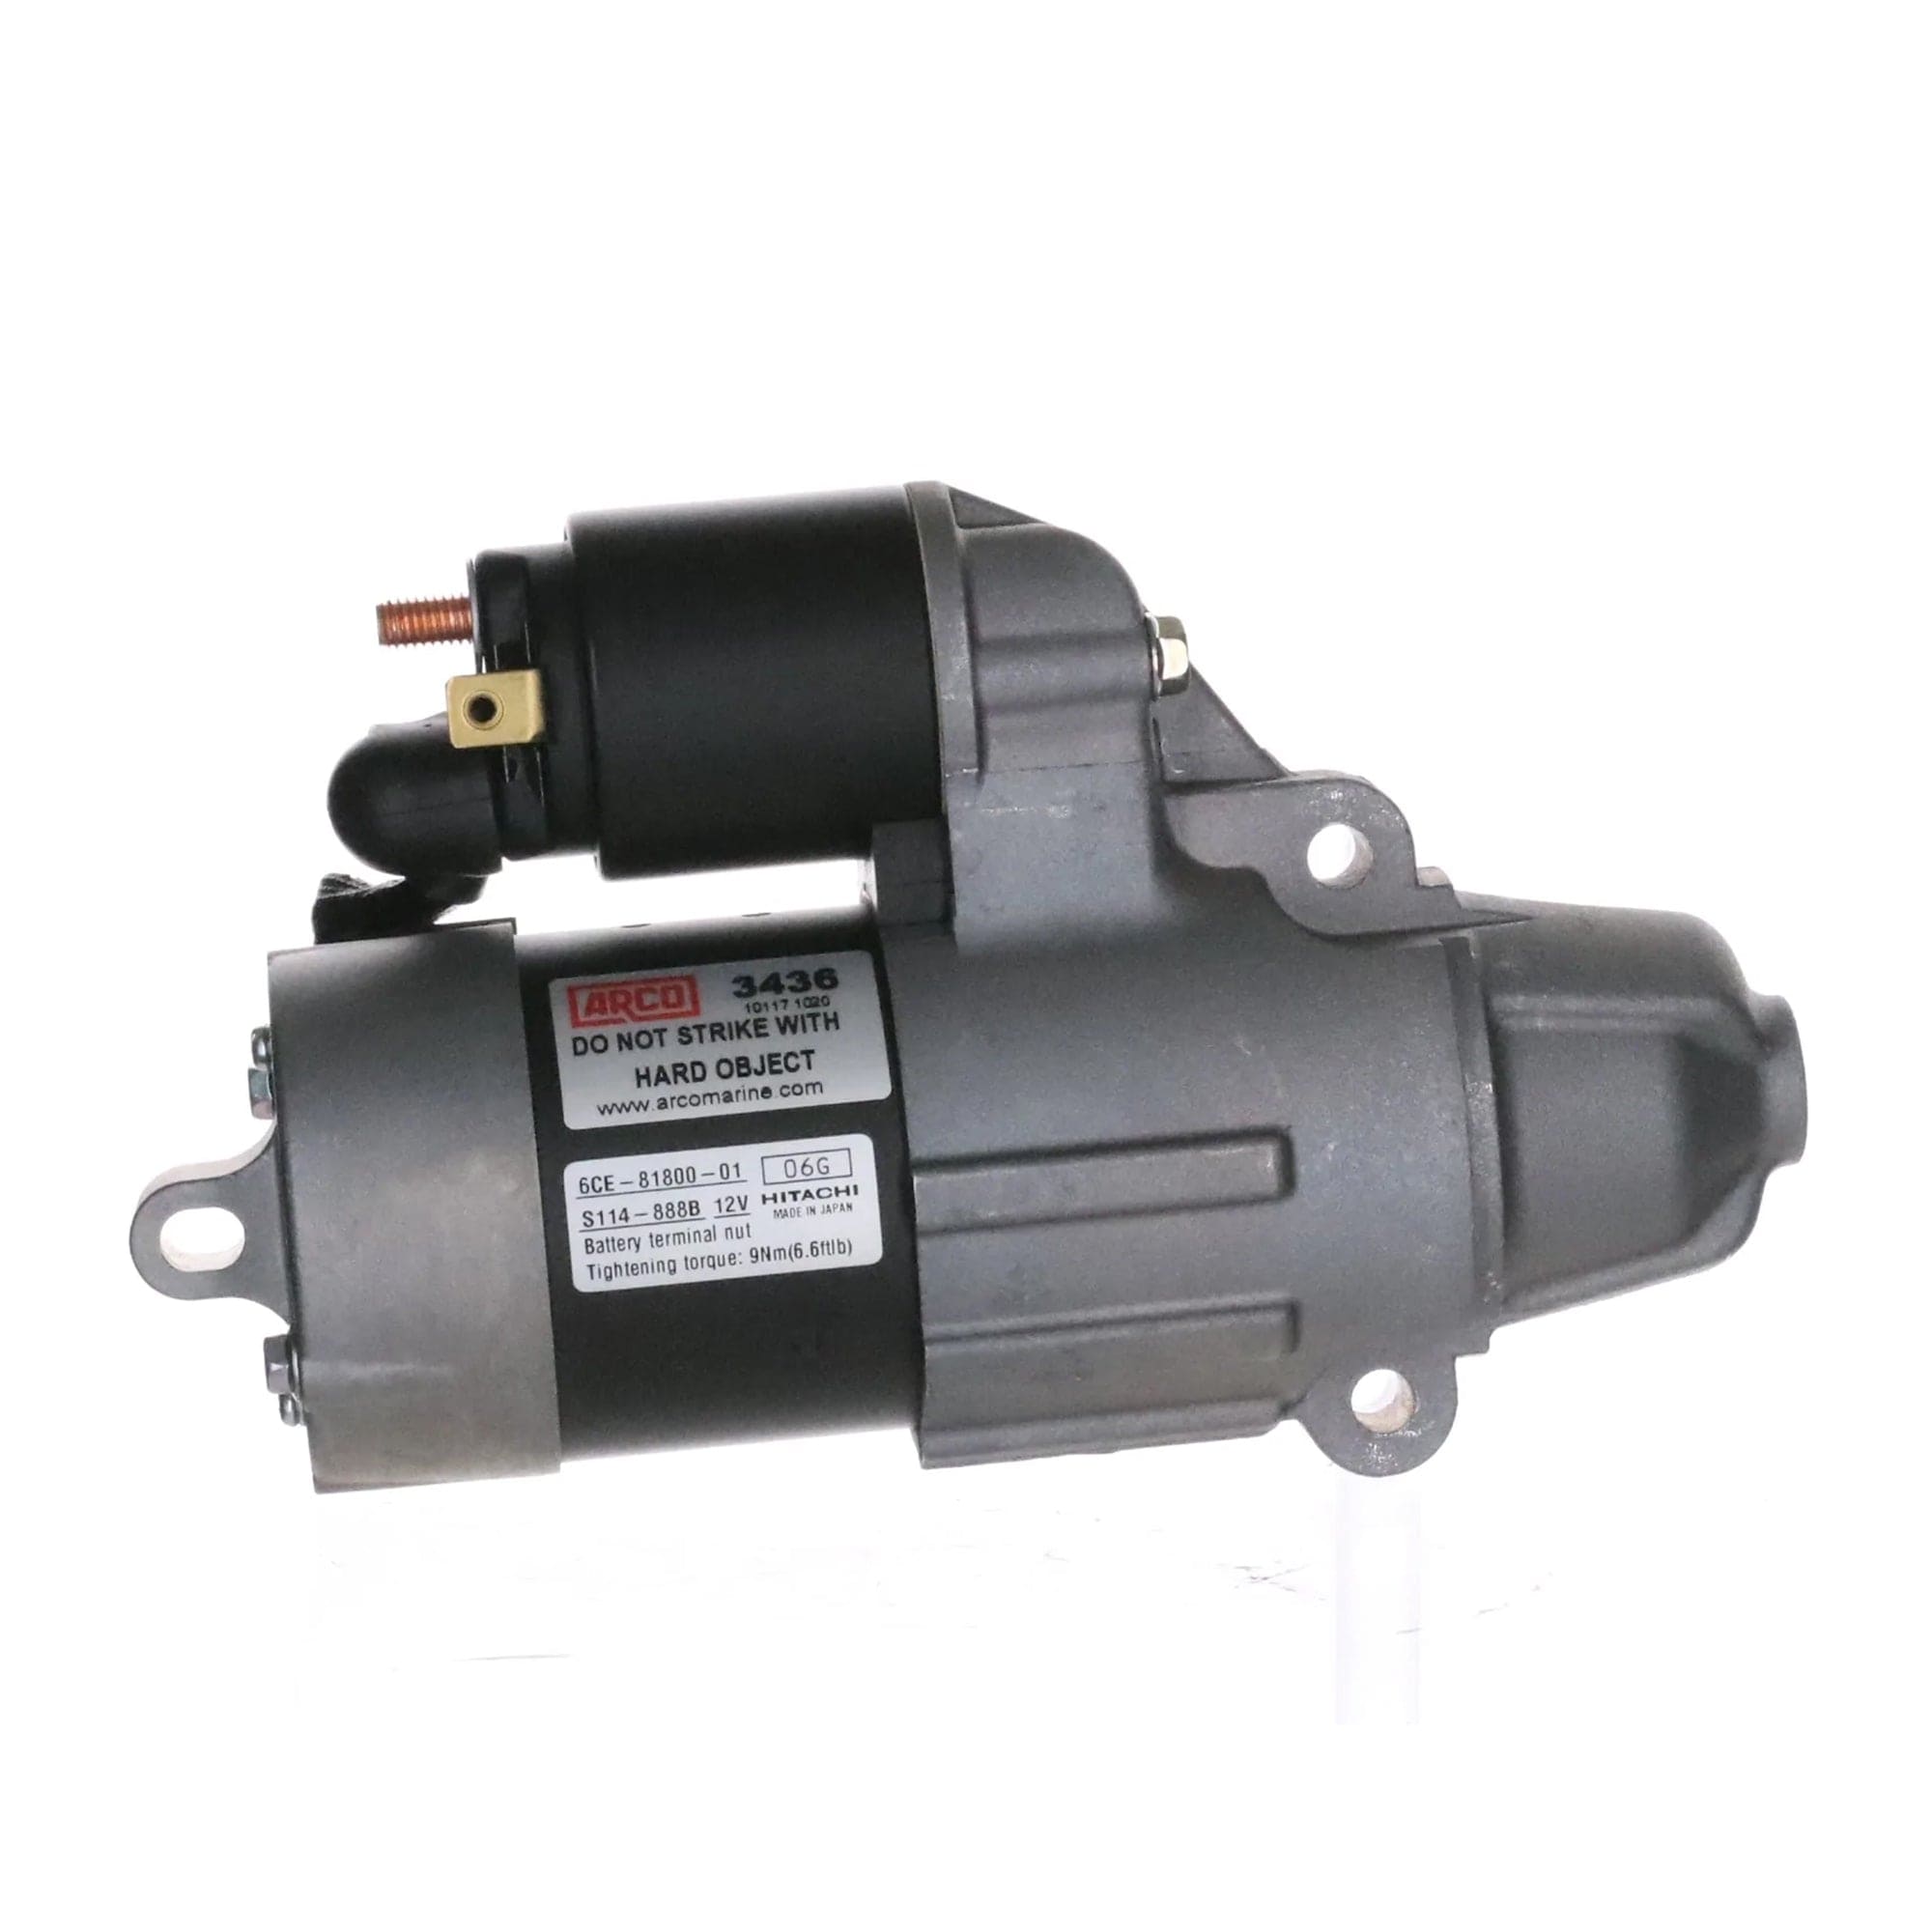 ARCO NEW OEM Premium Replacement Outboard Starter for Yamaha and Hitachi - 6CE-81800, S114-888